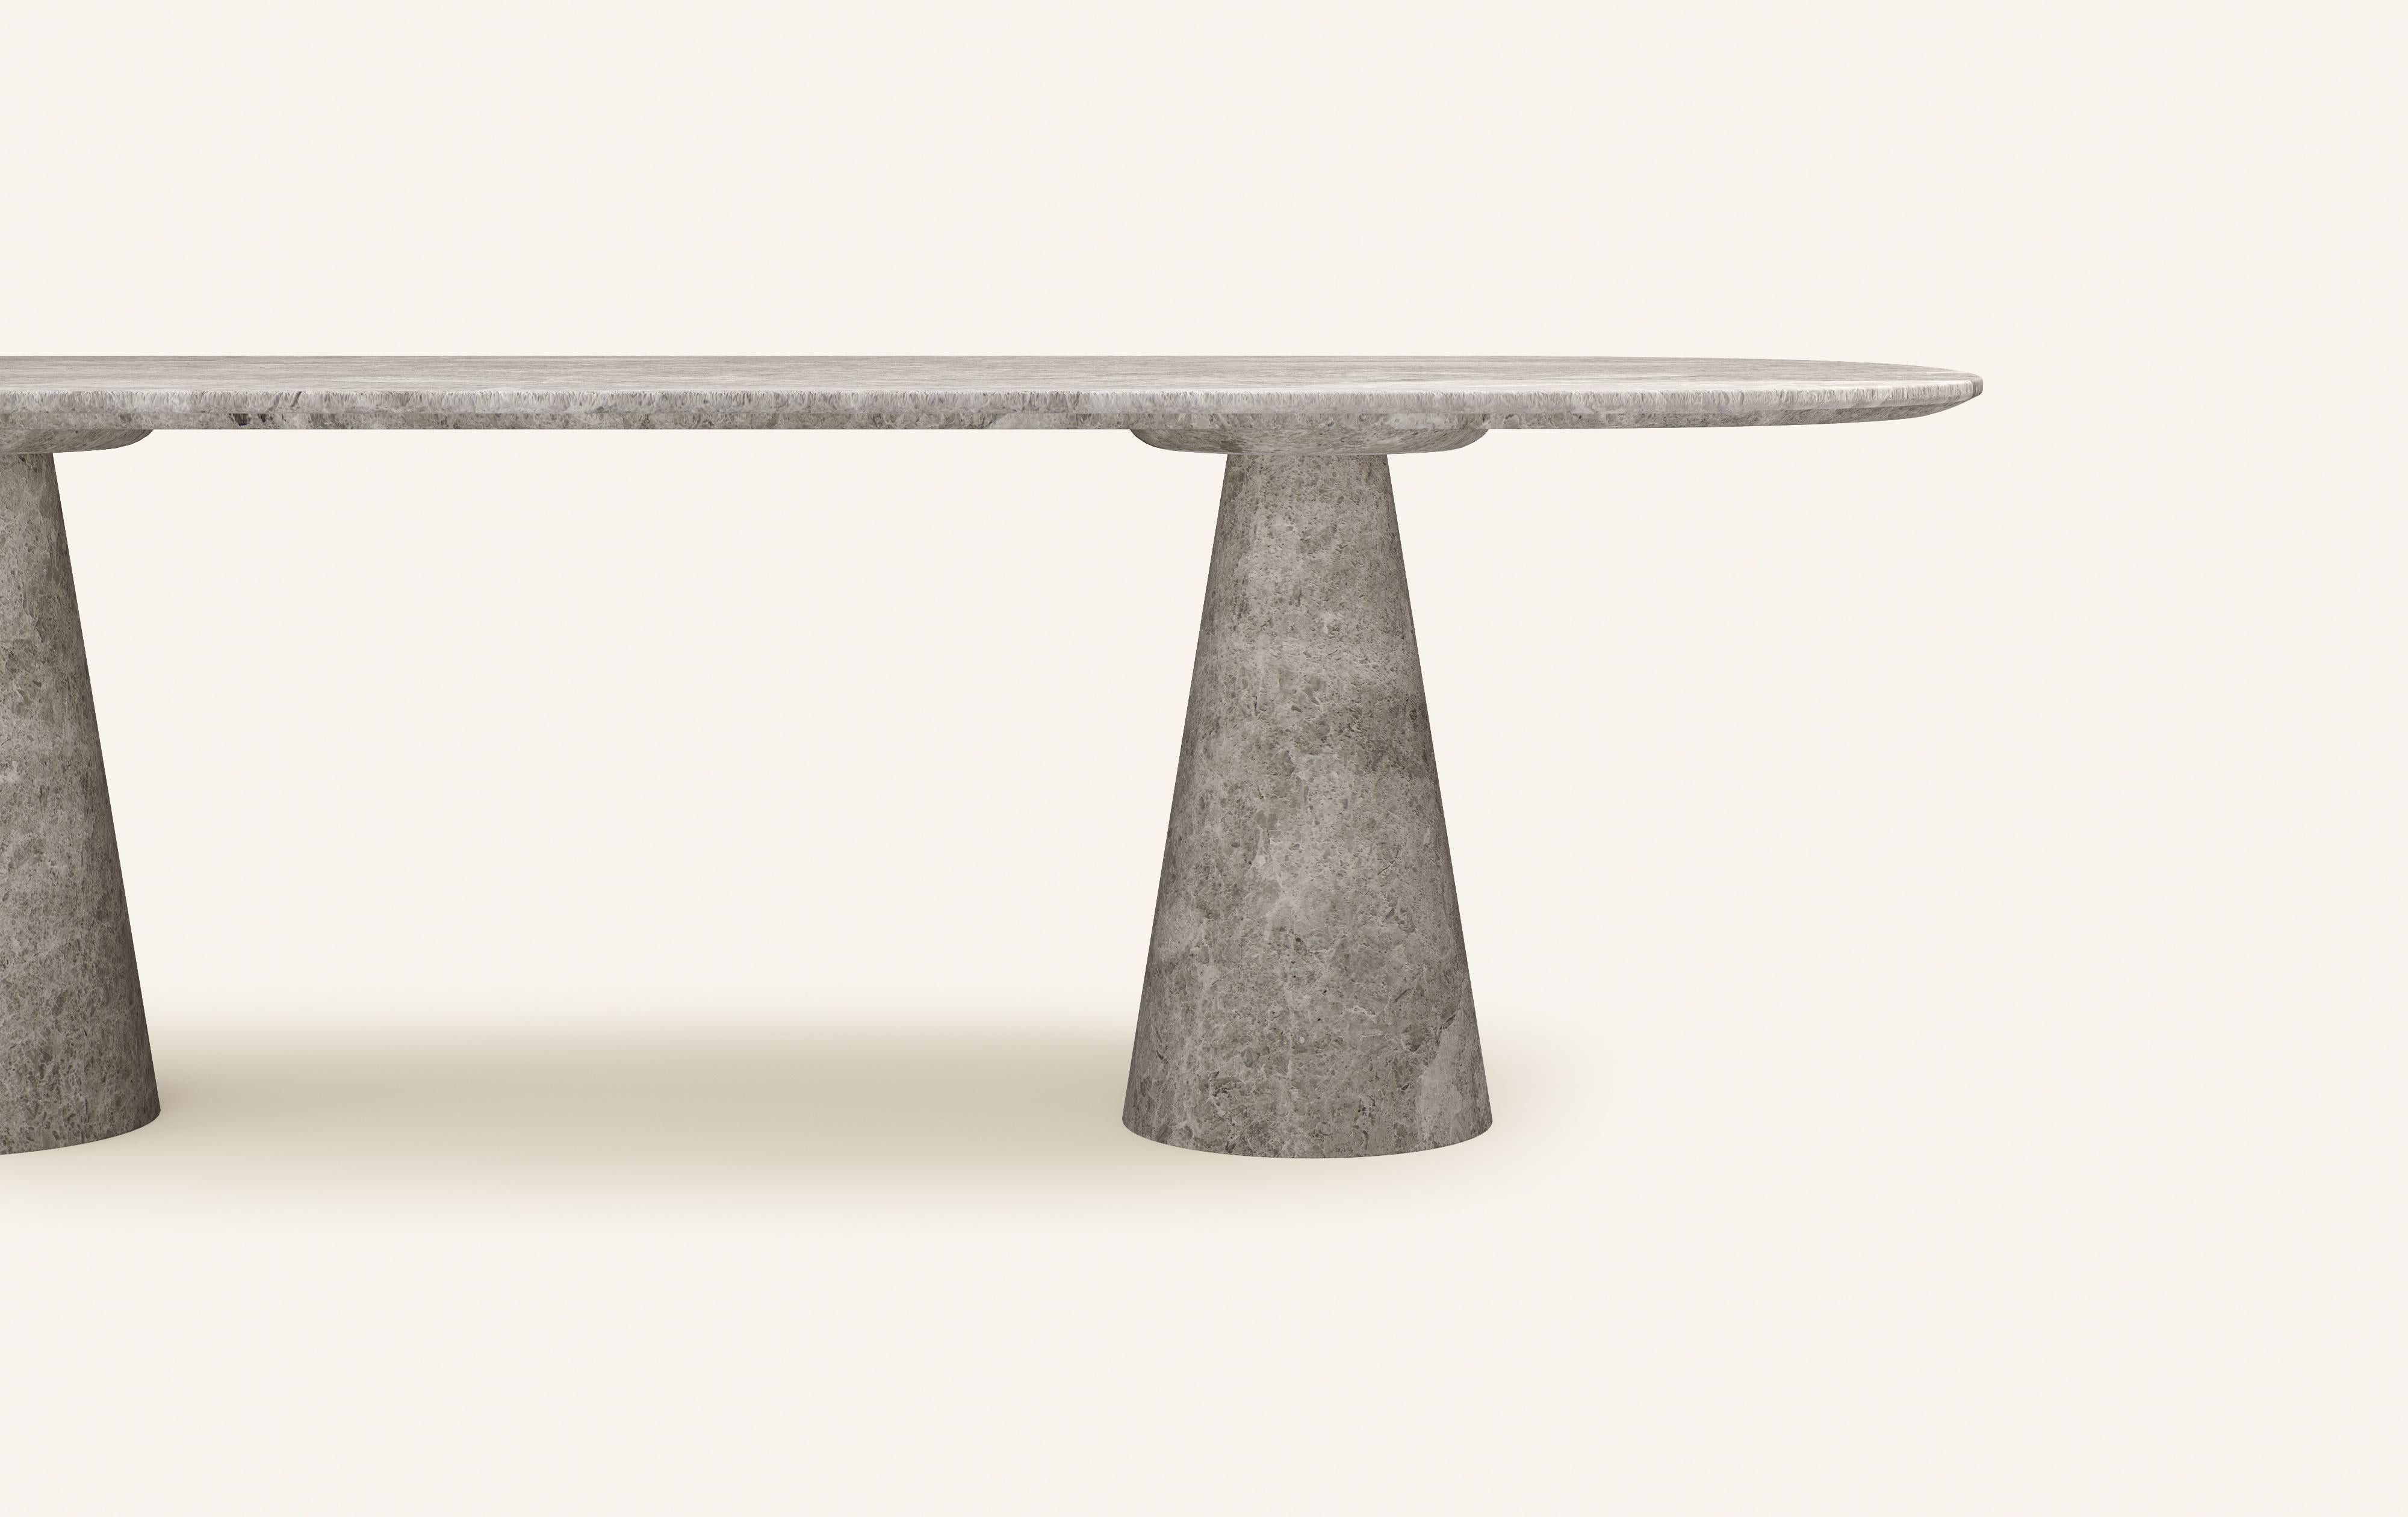 American FORM(LA) Cono Oval Dining Table 84”L x 42”W x 30”H Tundra Gray Marble For Sale